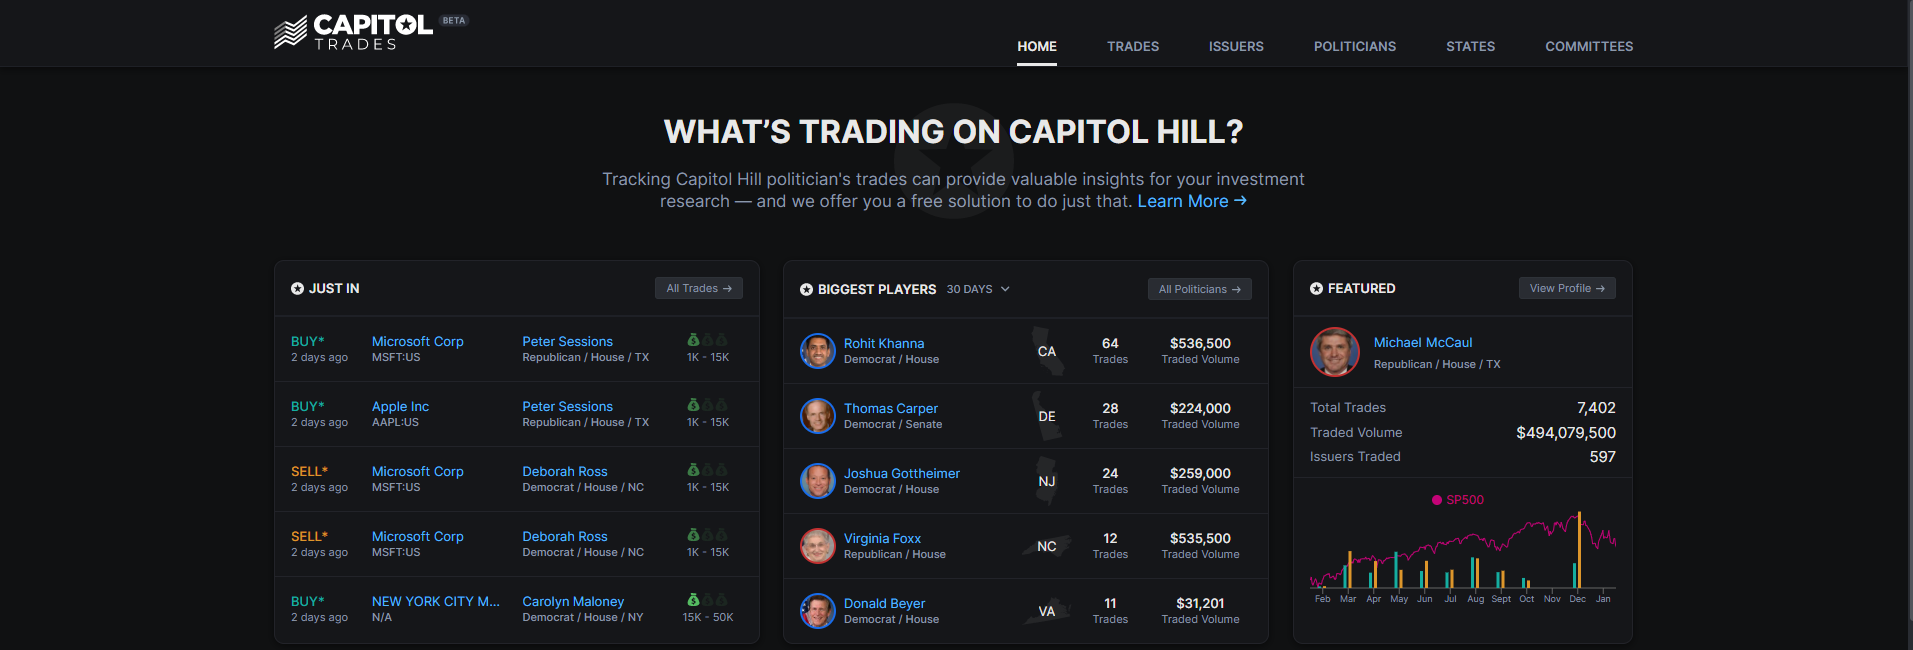 A screenshot of Capitol Trades' Website with pages menu bar on the top right, and bottom tables displaying the latest trades and more frequent traders in Congress.